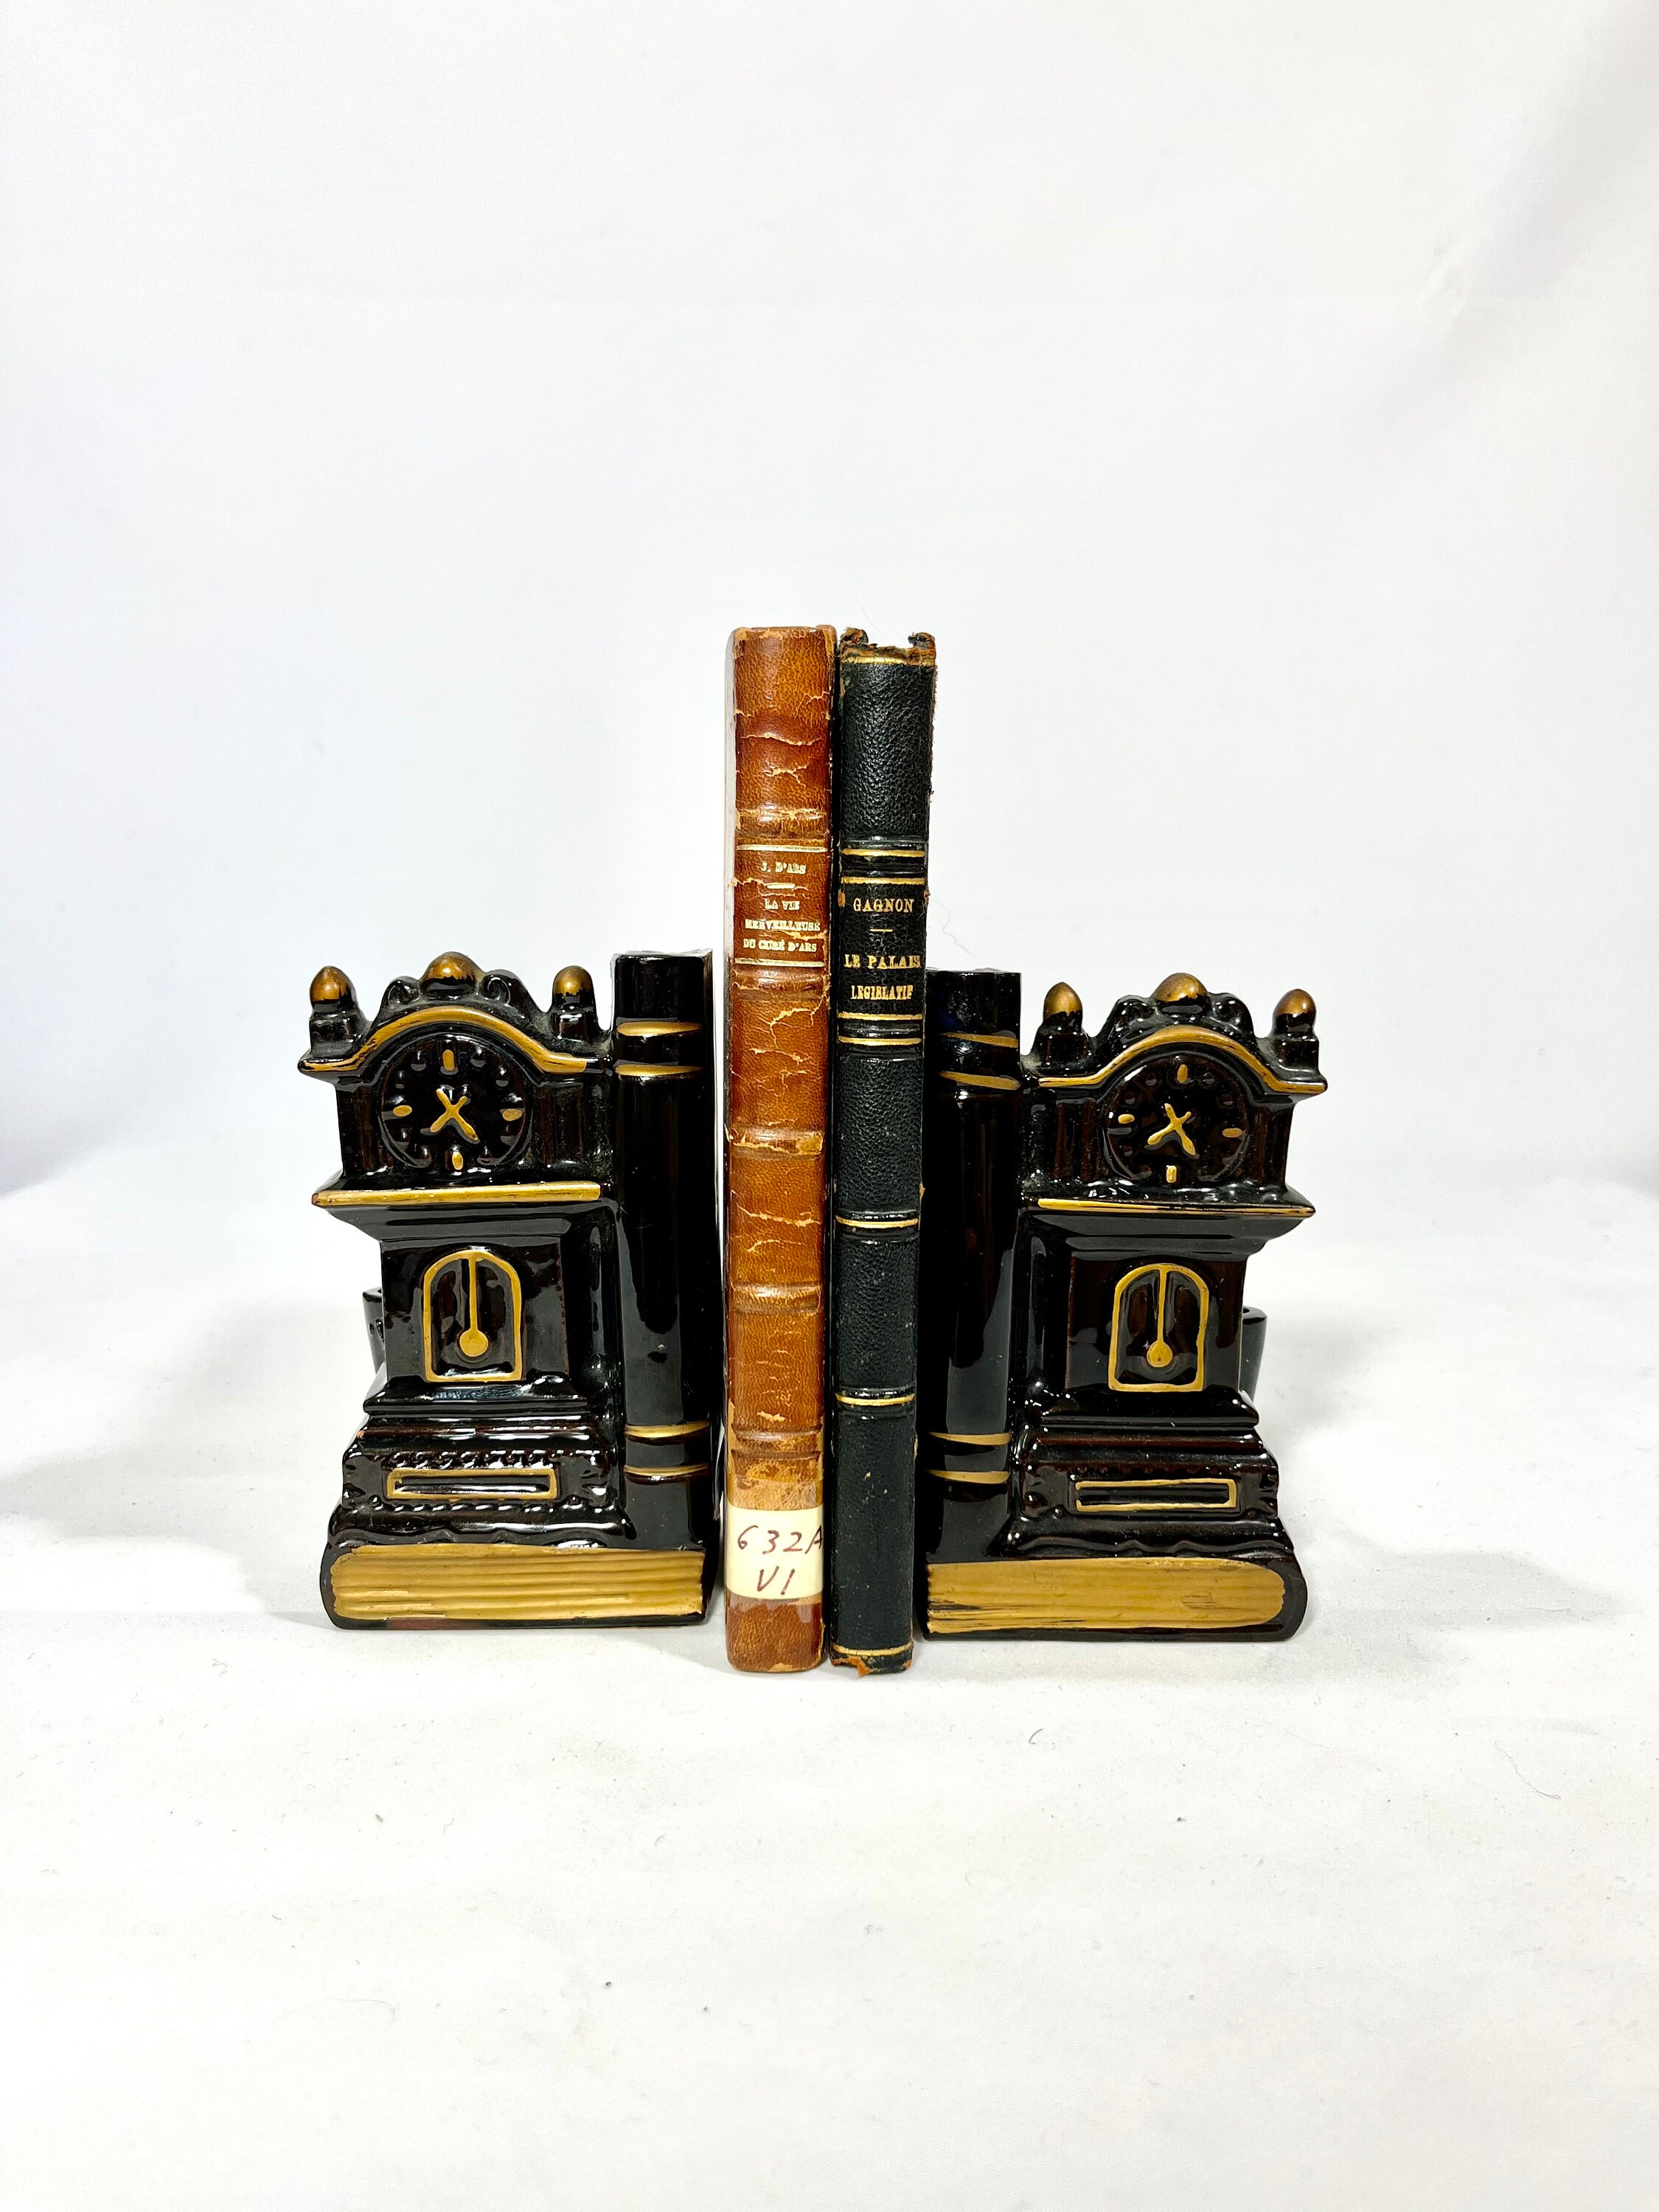 1950s Clock Bookends / Black Porcelain Bookends With Pen - Etsy